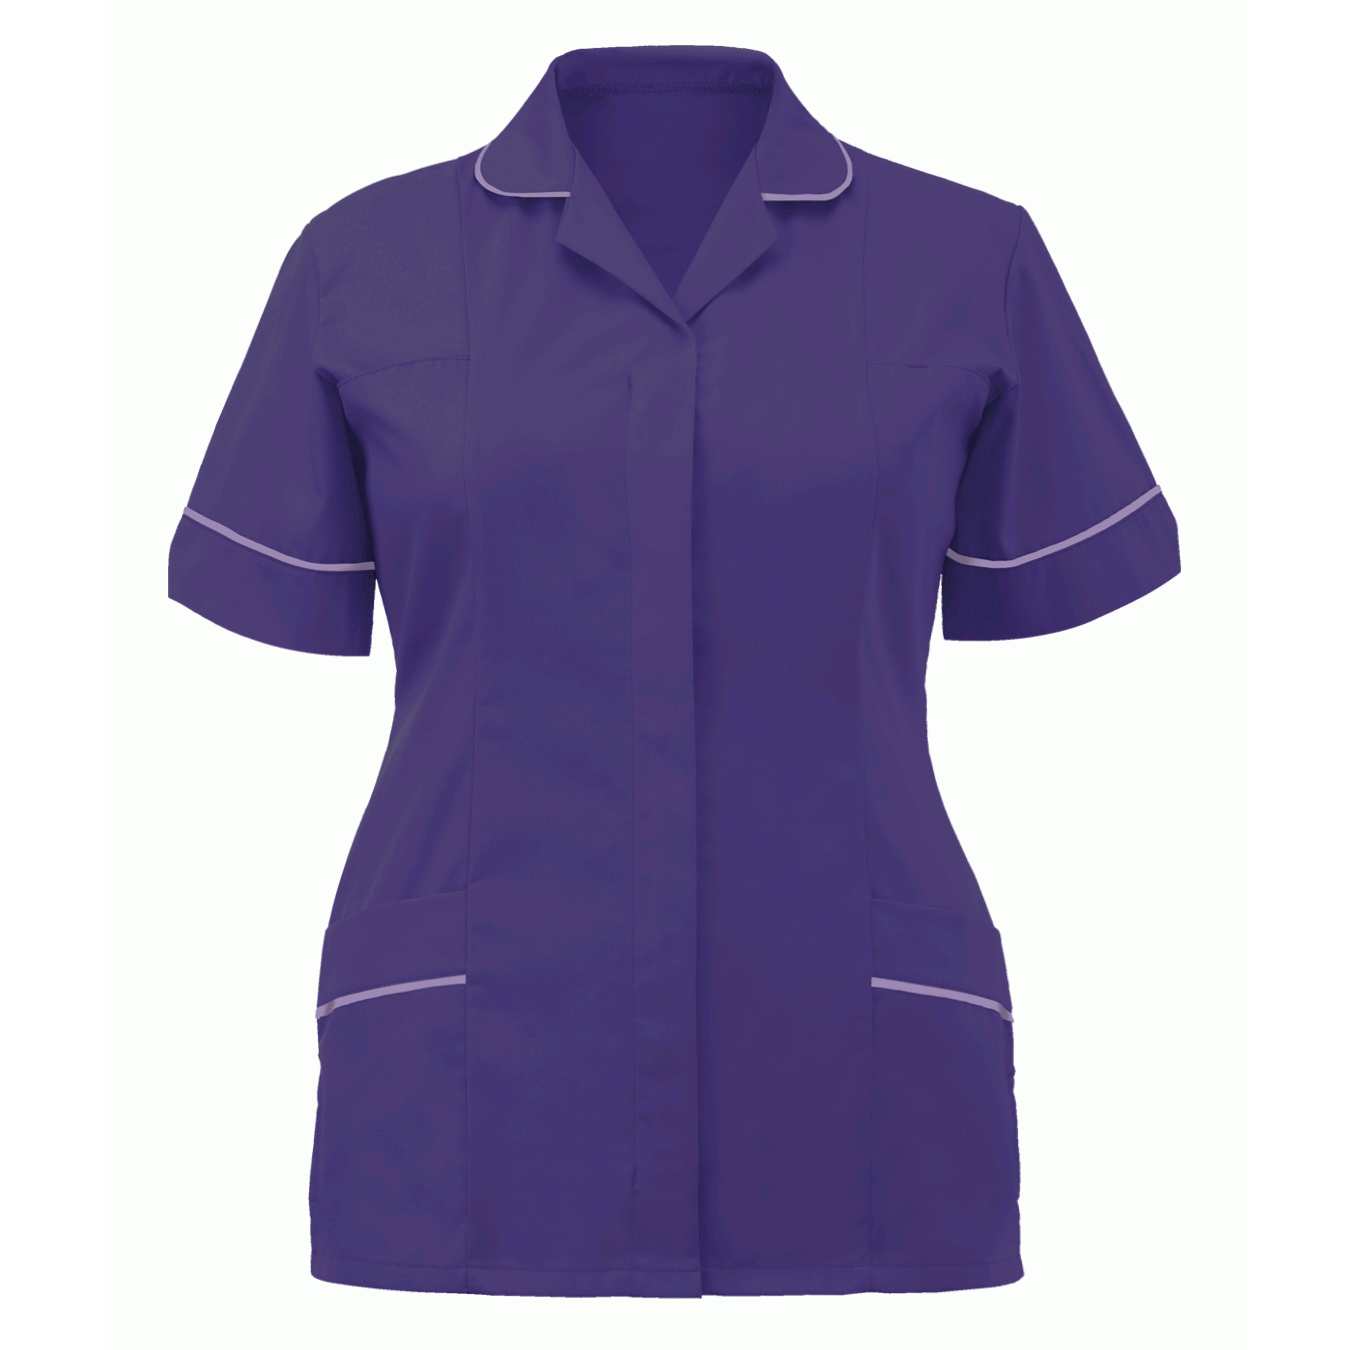 CLASSIC TUNIC: LADIES - MIXED - PURPLE AND LILAC